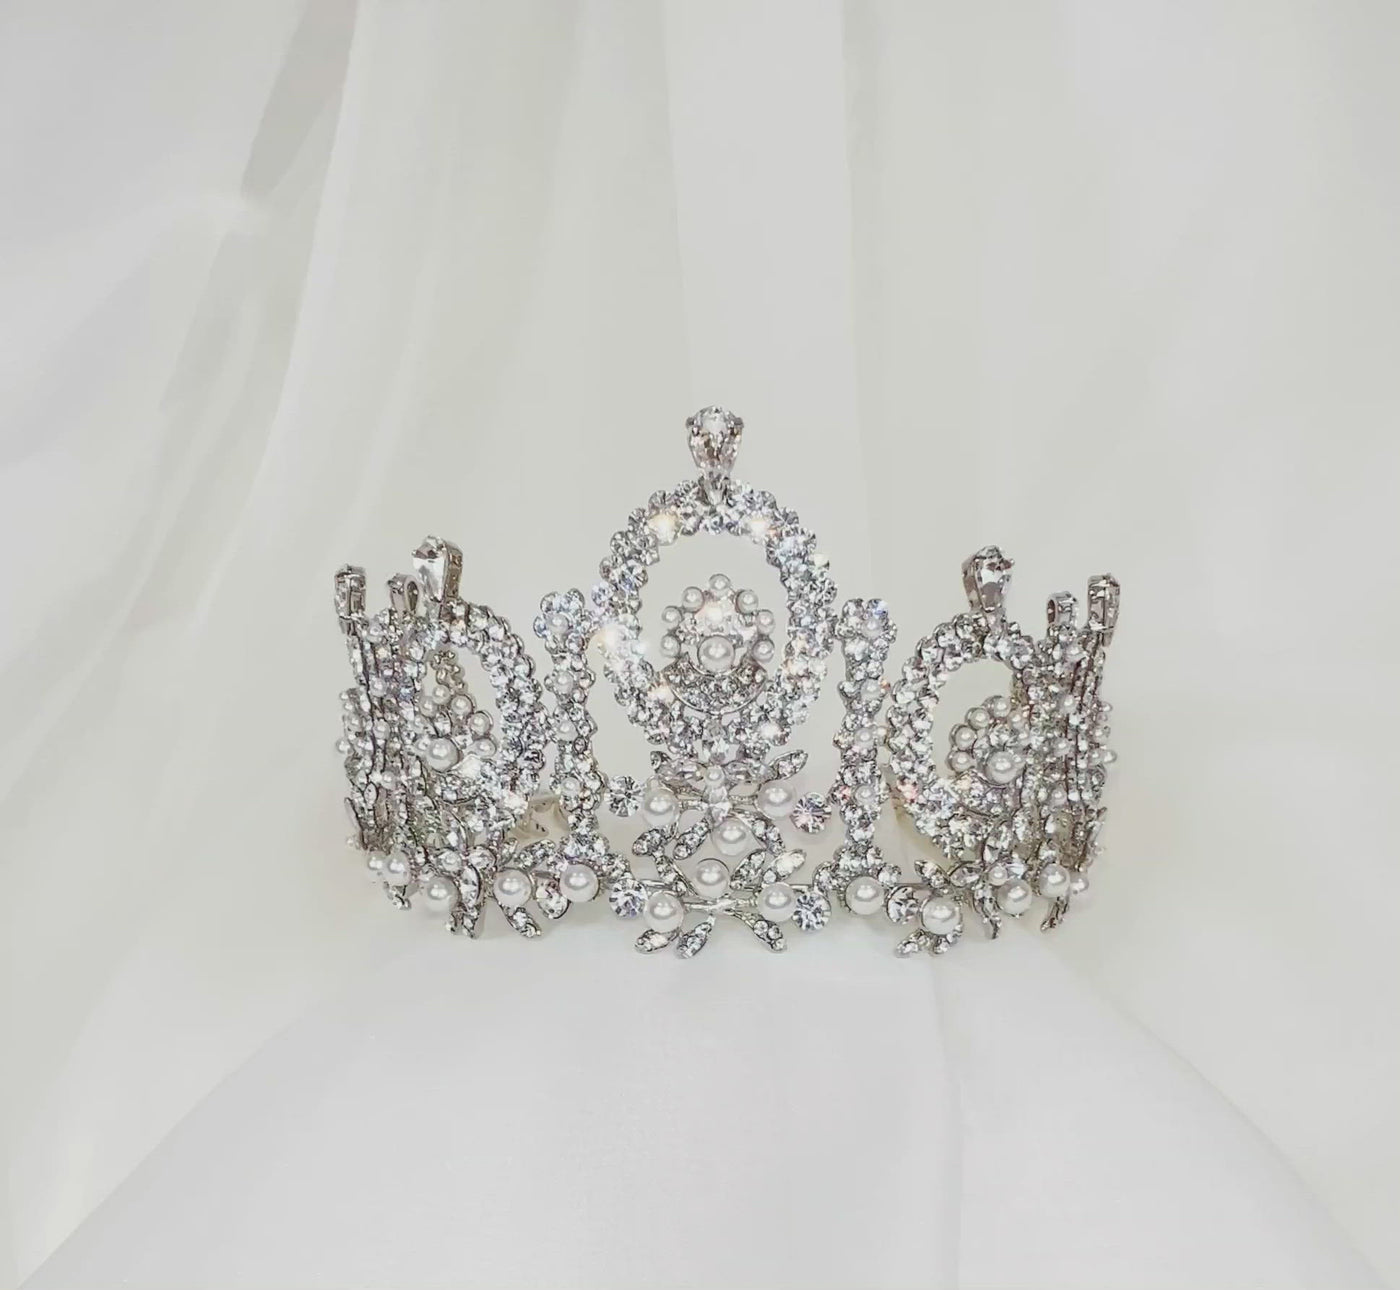 silver bridal crown with sparkling crystal halos and pearl details.